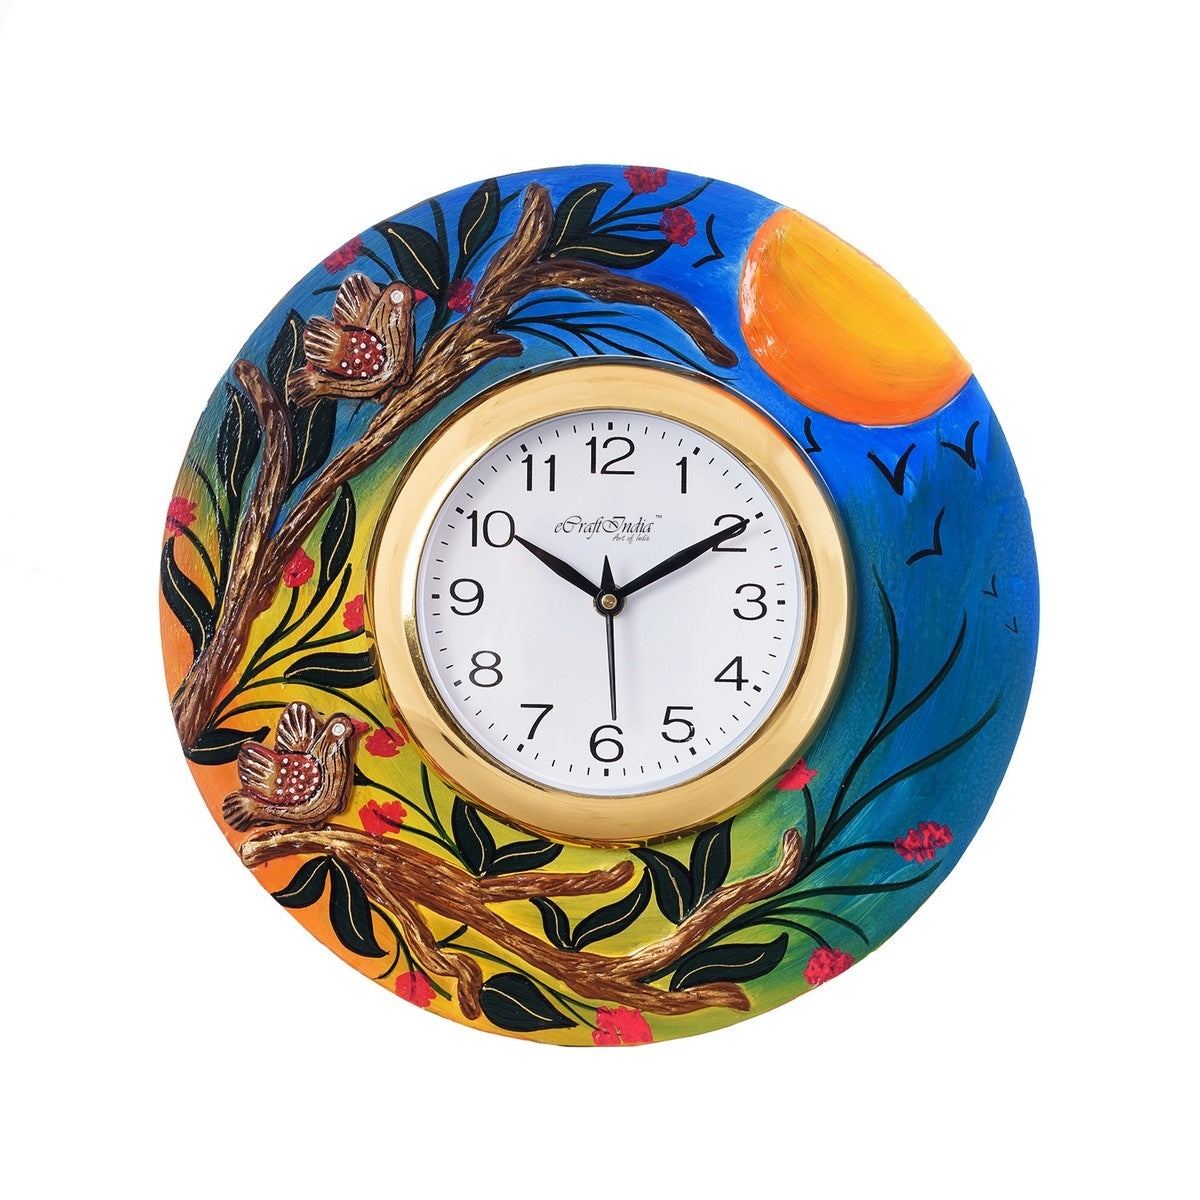 Sunrise View Handcrafted Decorative Wooden Wall Clock